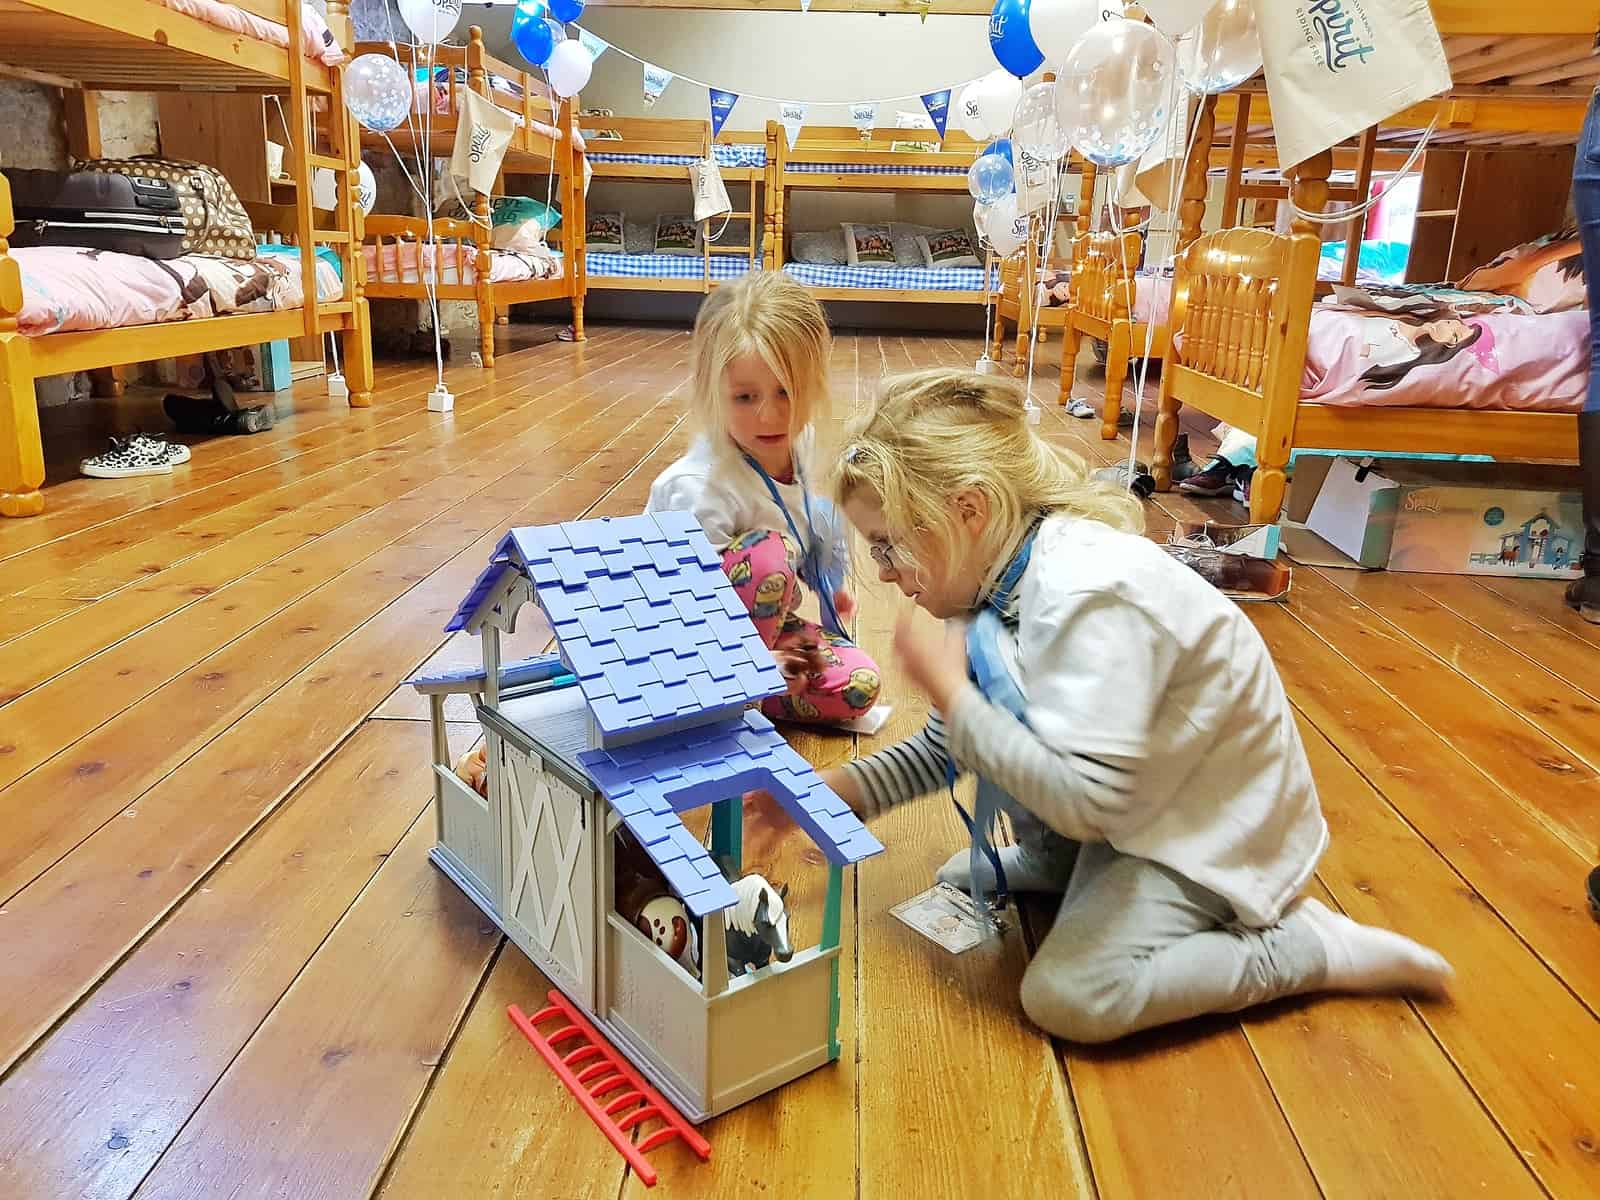 Spirit Riding Free Stable Sleepover girls playing with stable toy in dormitory